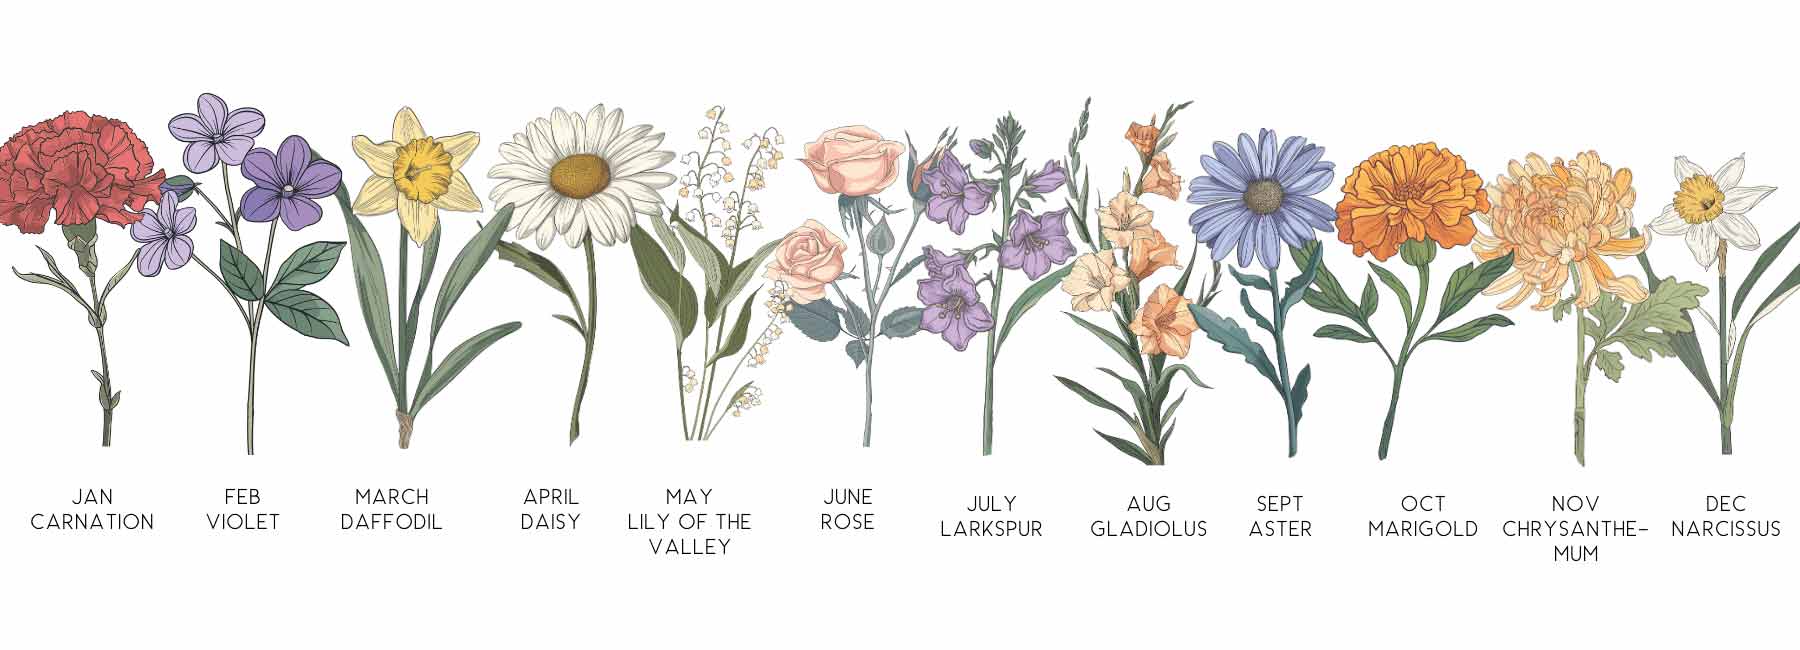 birth flowers by month